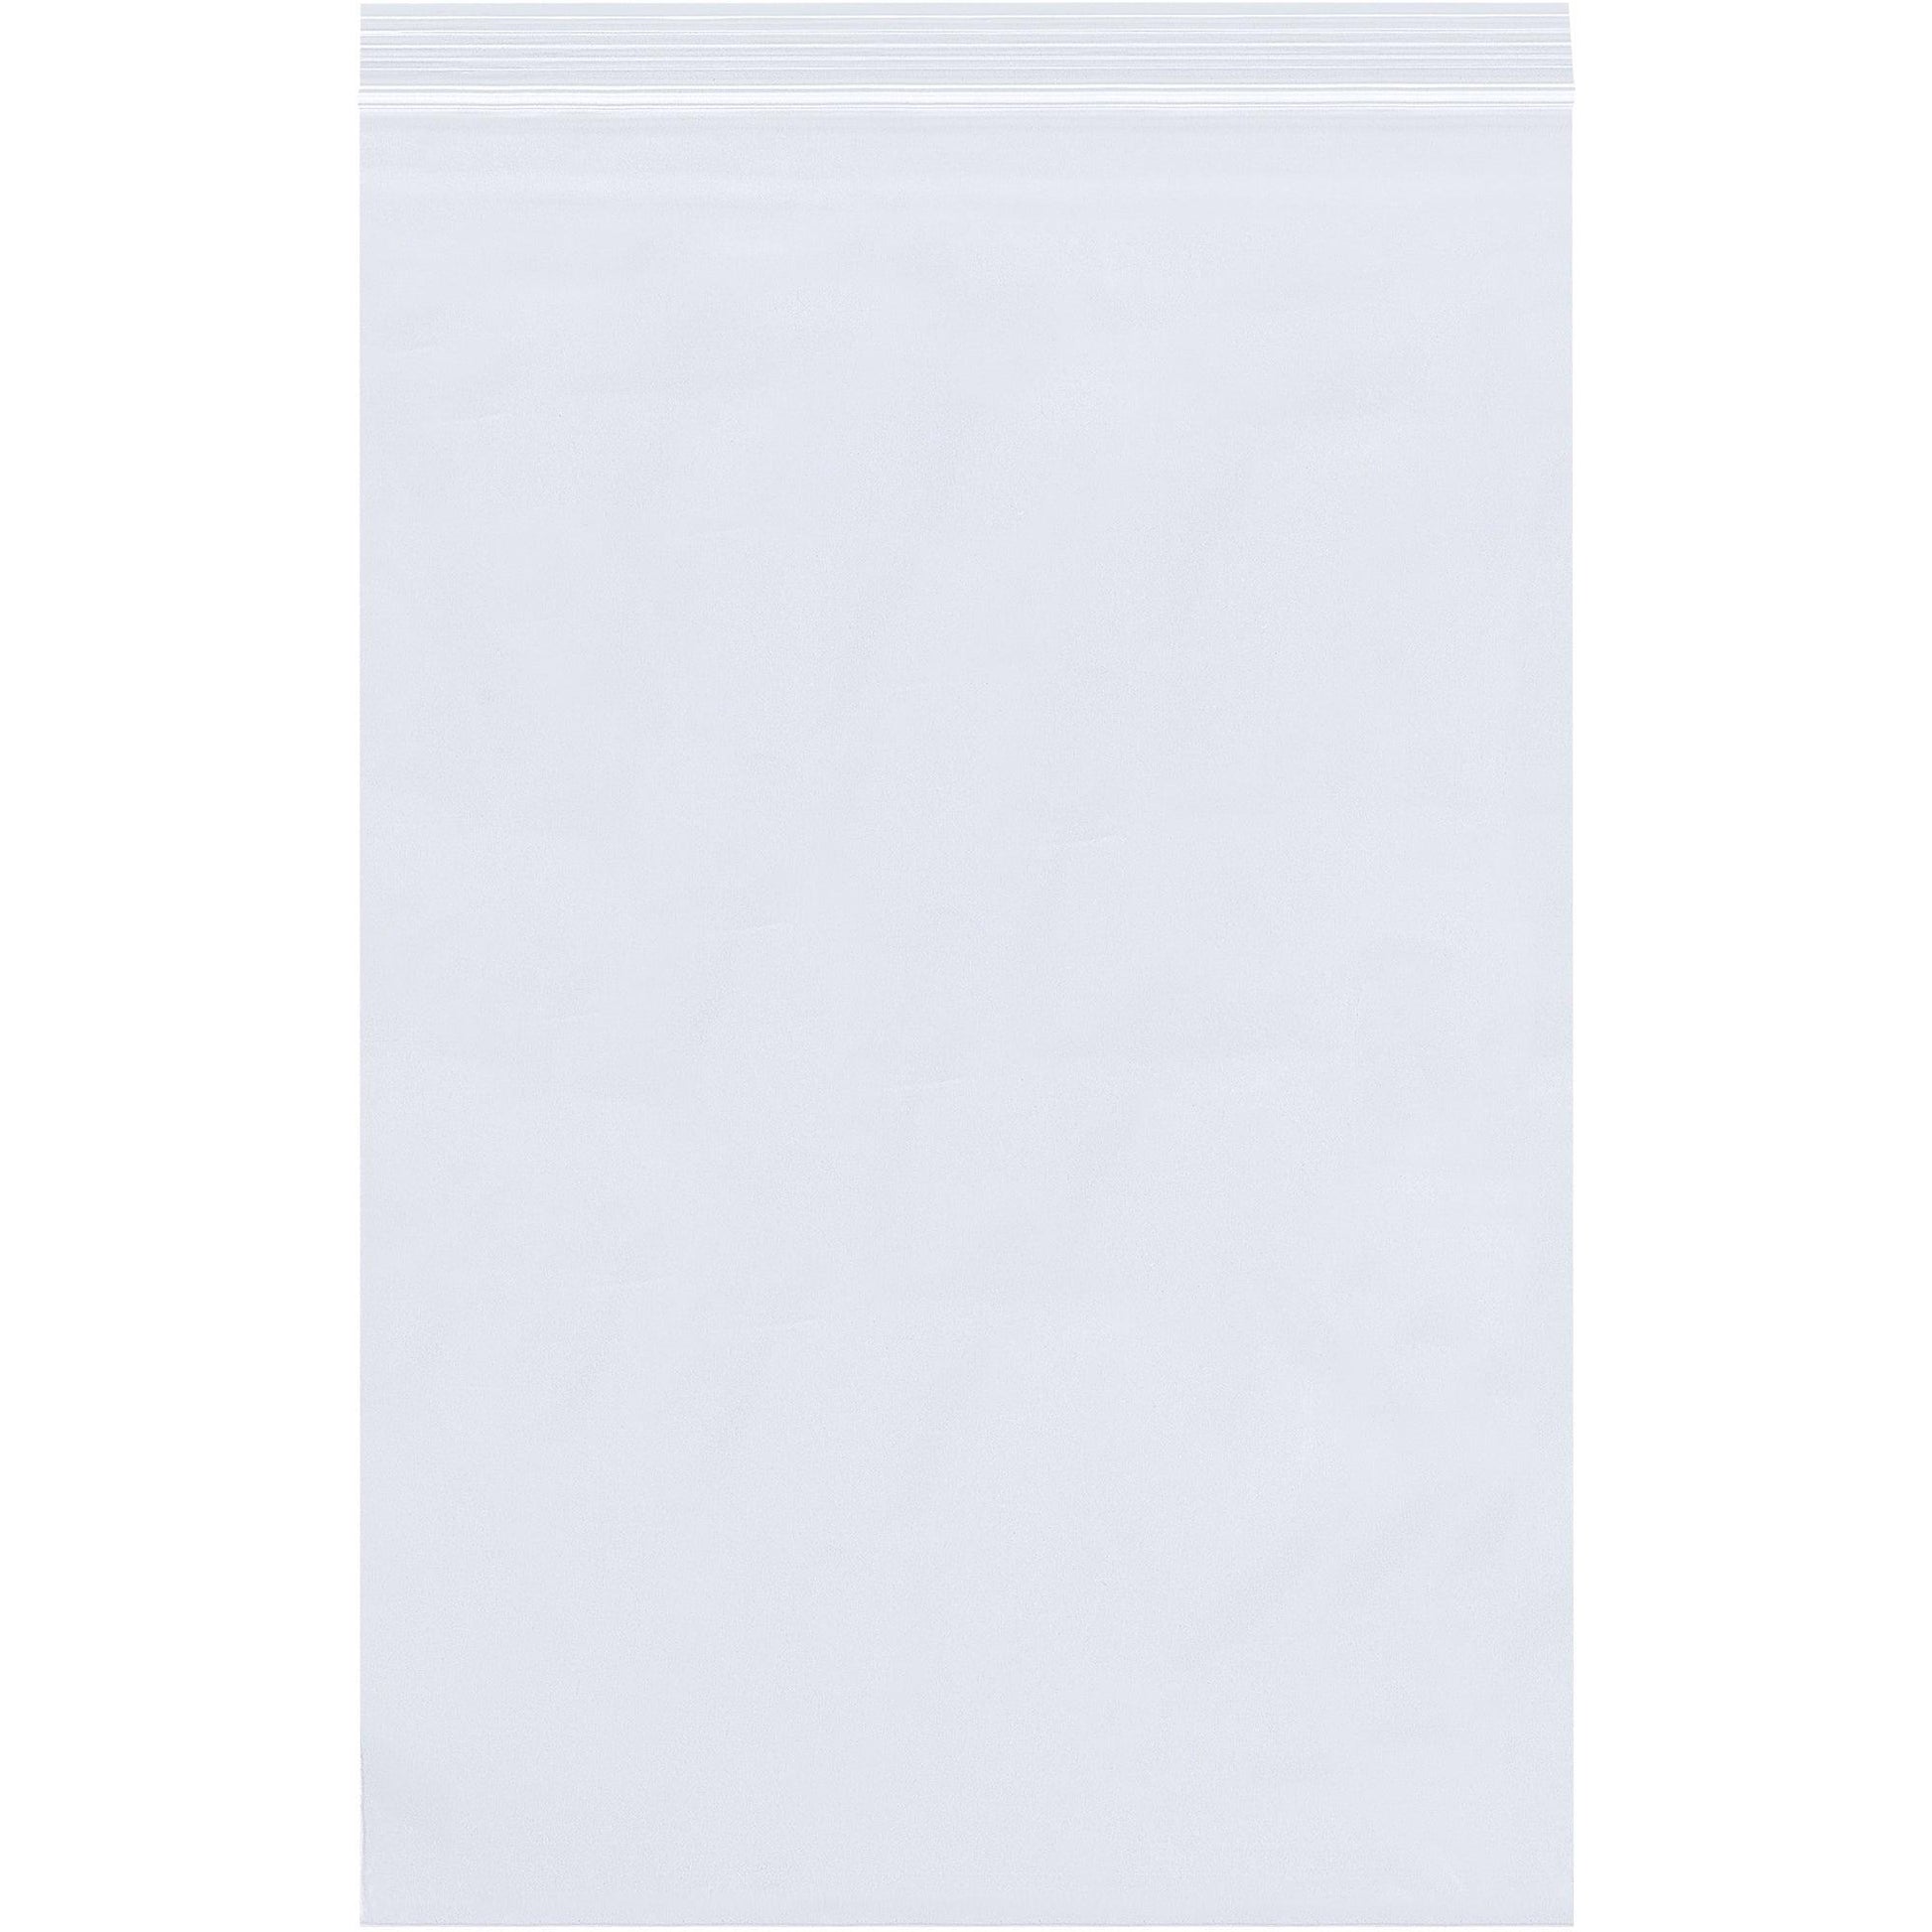 5 x 8" - 4 Mil Reclosable Poly Bags - PB3720